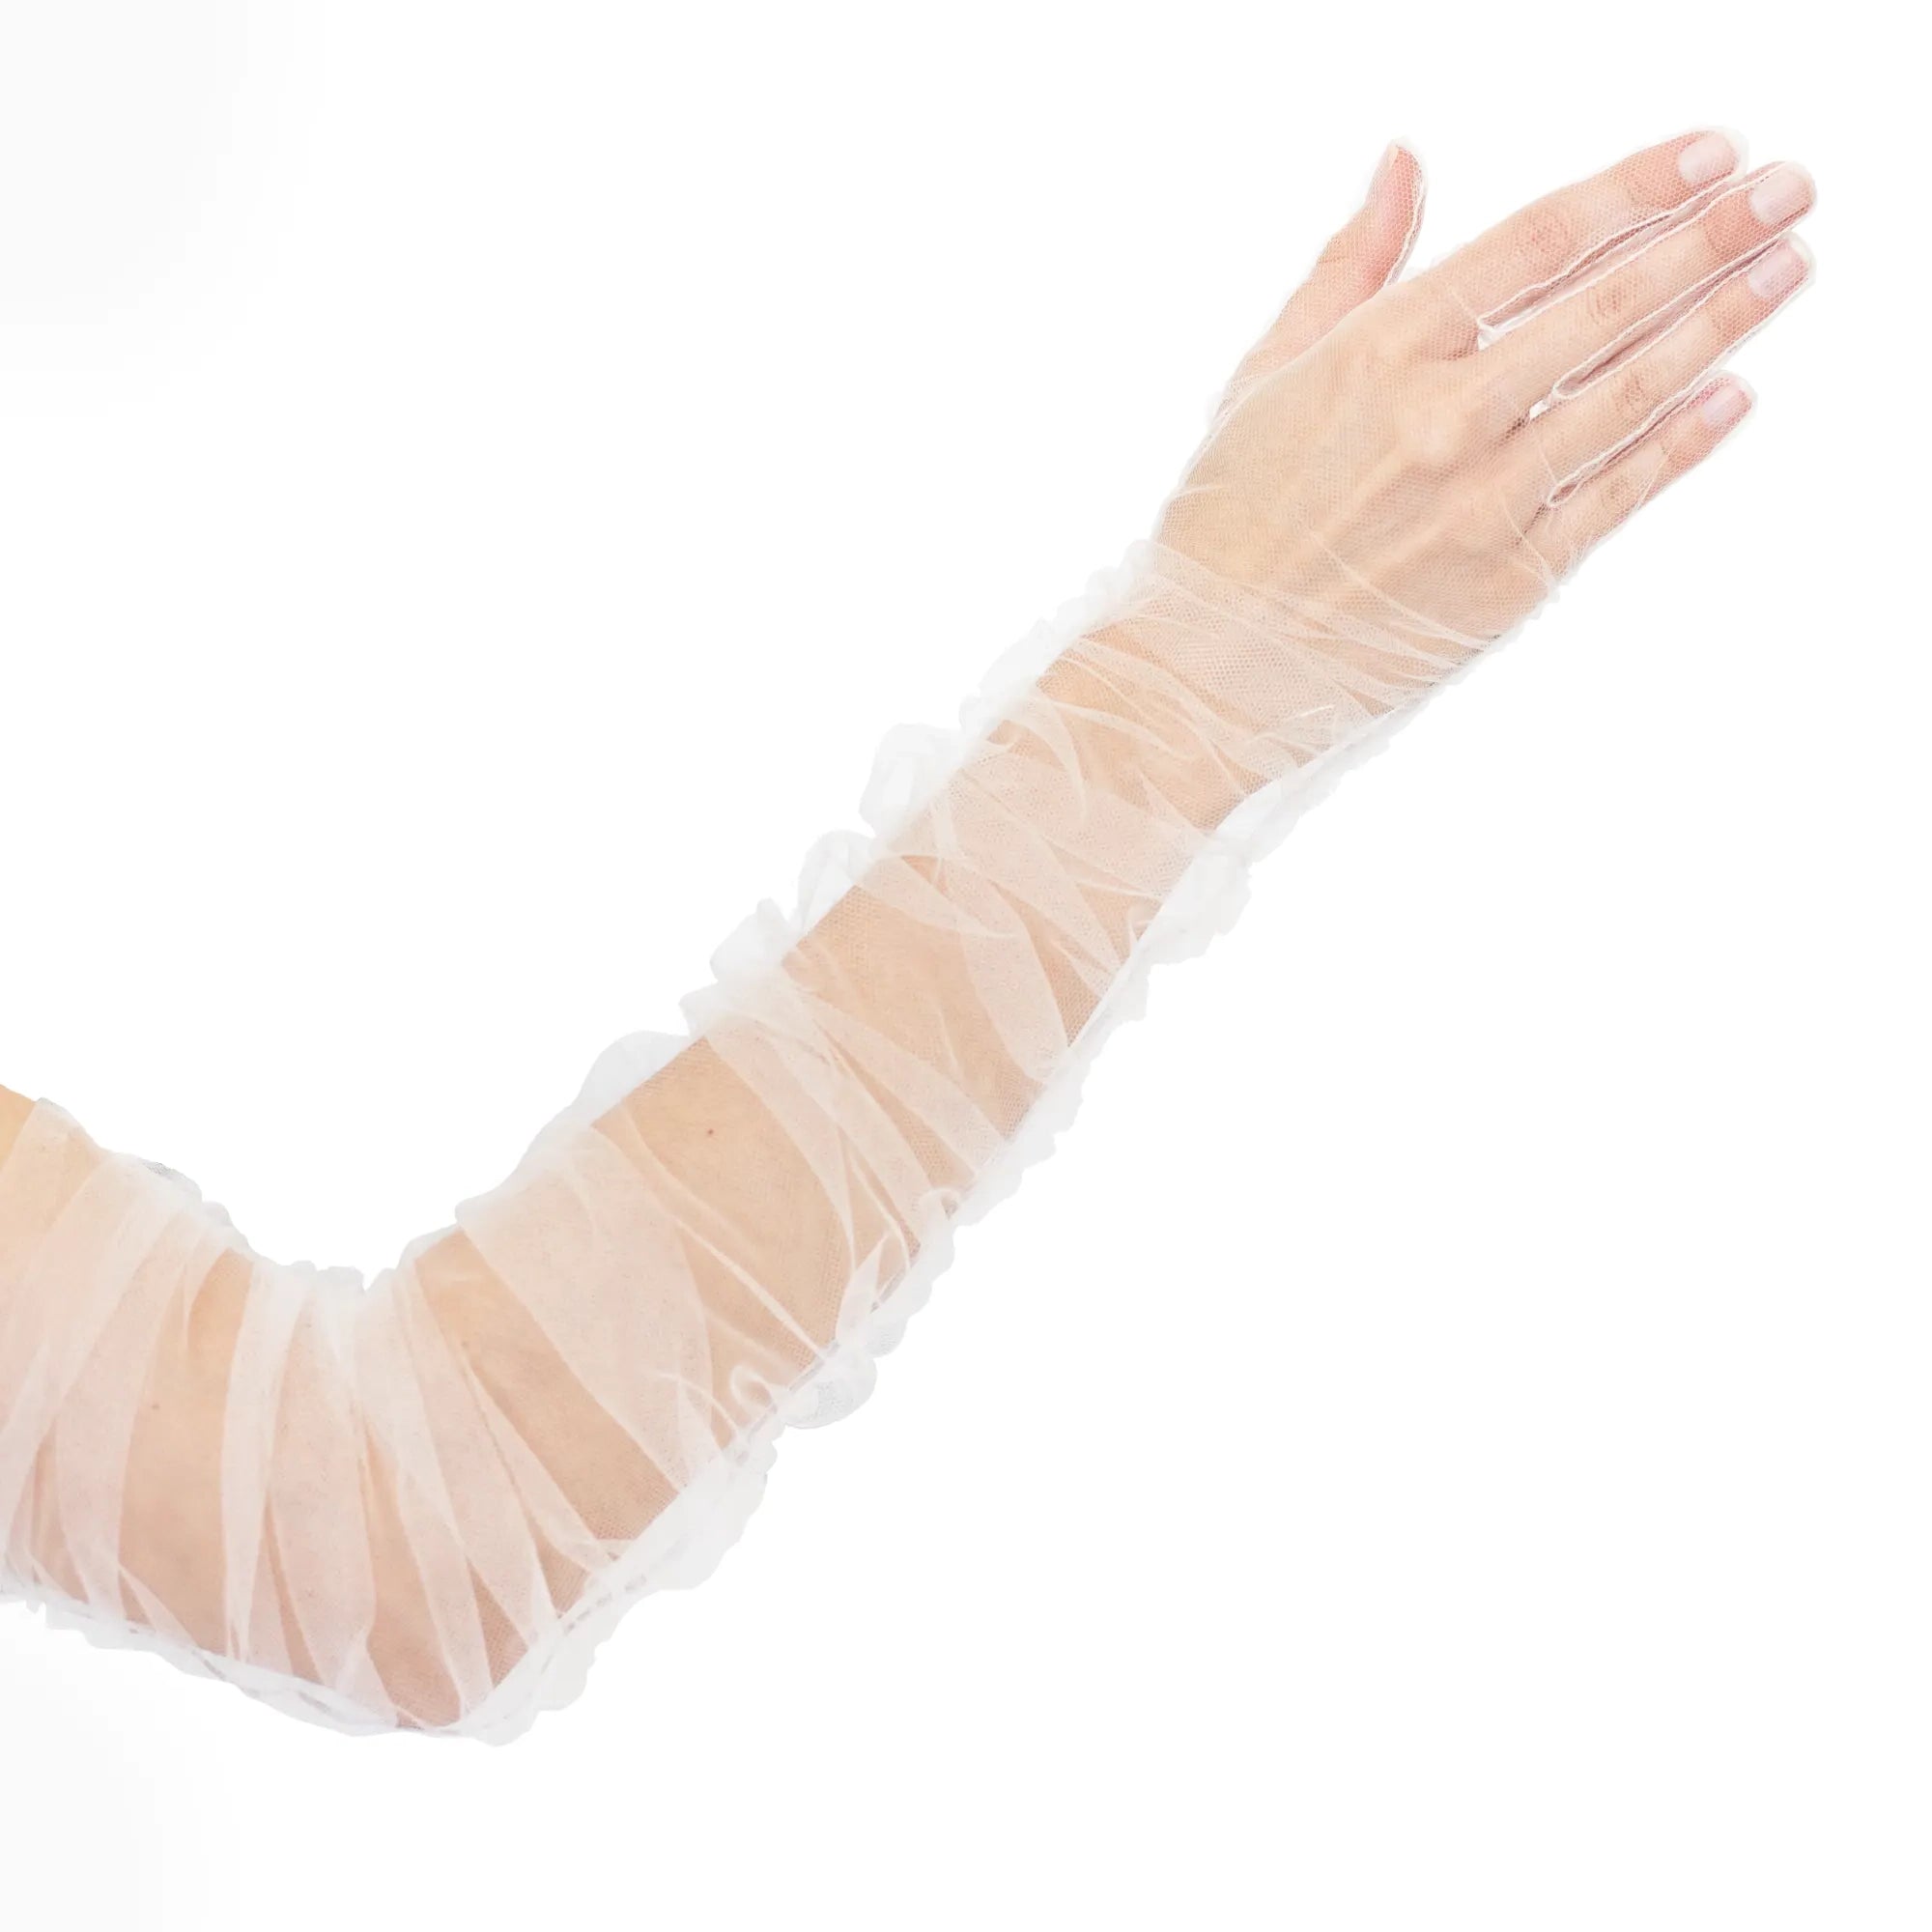 A person's arm is extended with a sheer, ruffled, white fabric sleeve covering it from wrist to upper arm, resembling the elegance of THE KATHERINE - Opera Length Ruched White Tulle Gloves by LadyFinch.